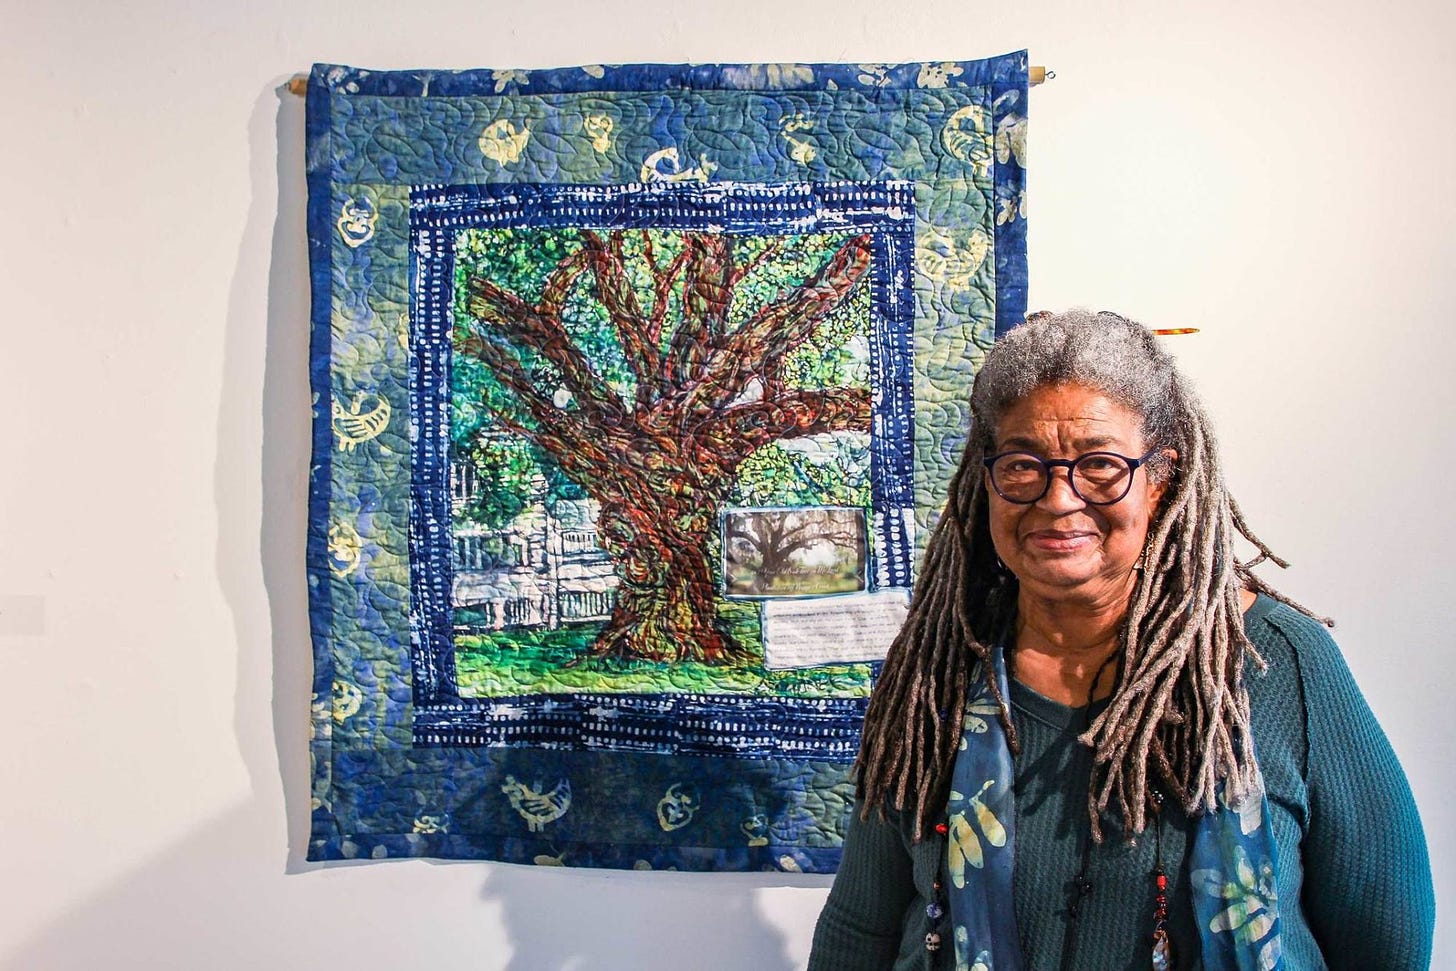 Arianne-King-Comer-poses-with-quilt-art-of-tree-South-Carolina-March-2022-1860x0-c-default.jpg